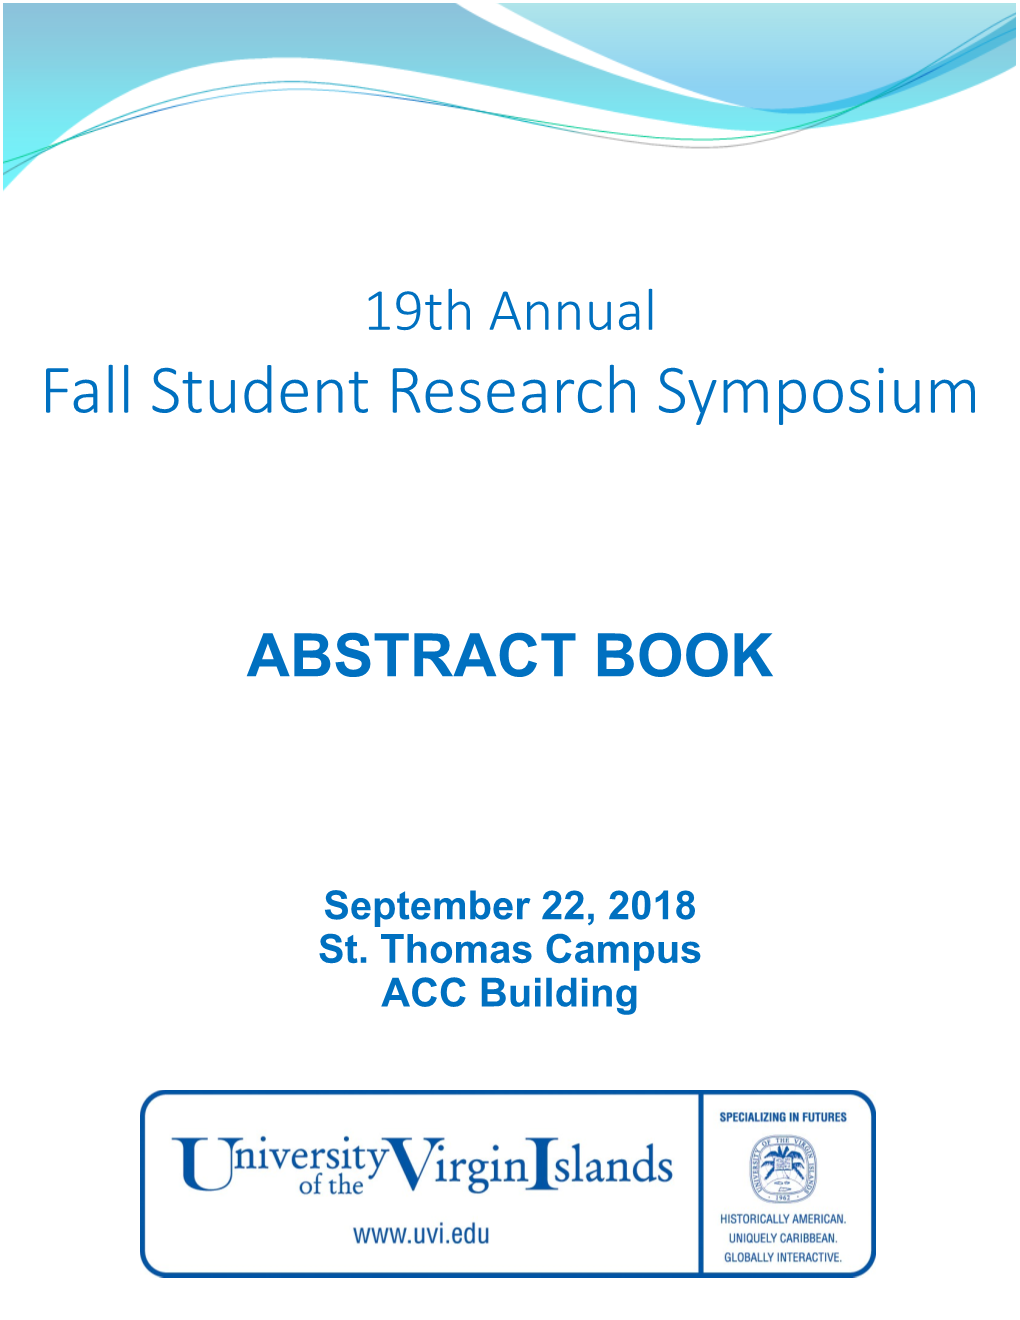 2018 Fall Student Research Symposium Abstract Book